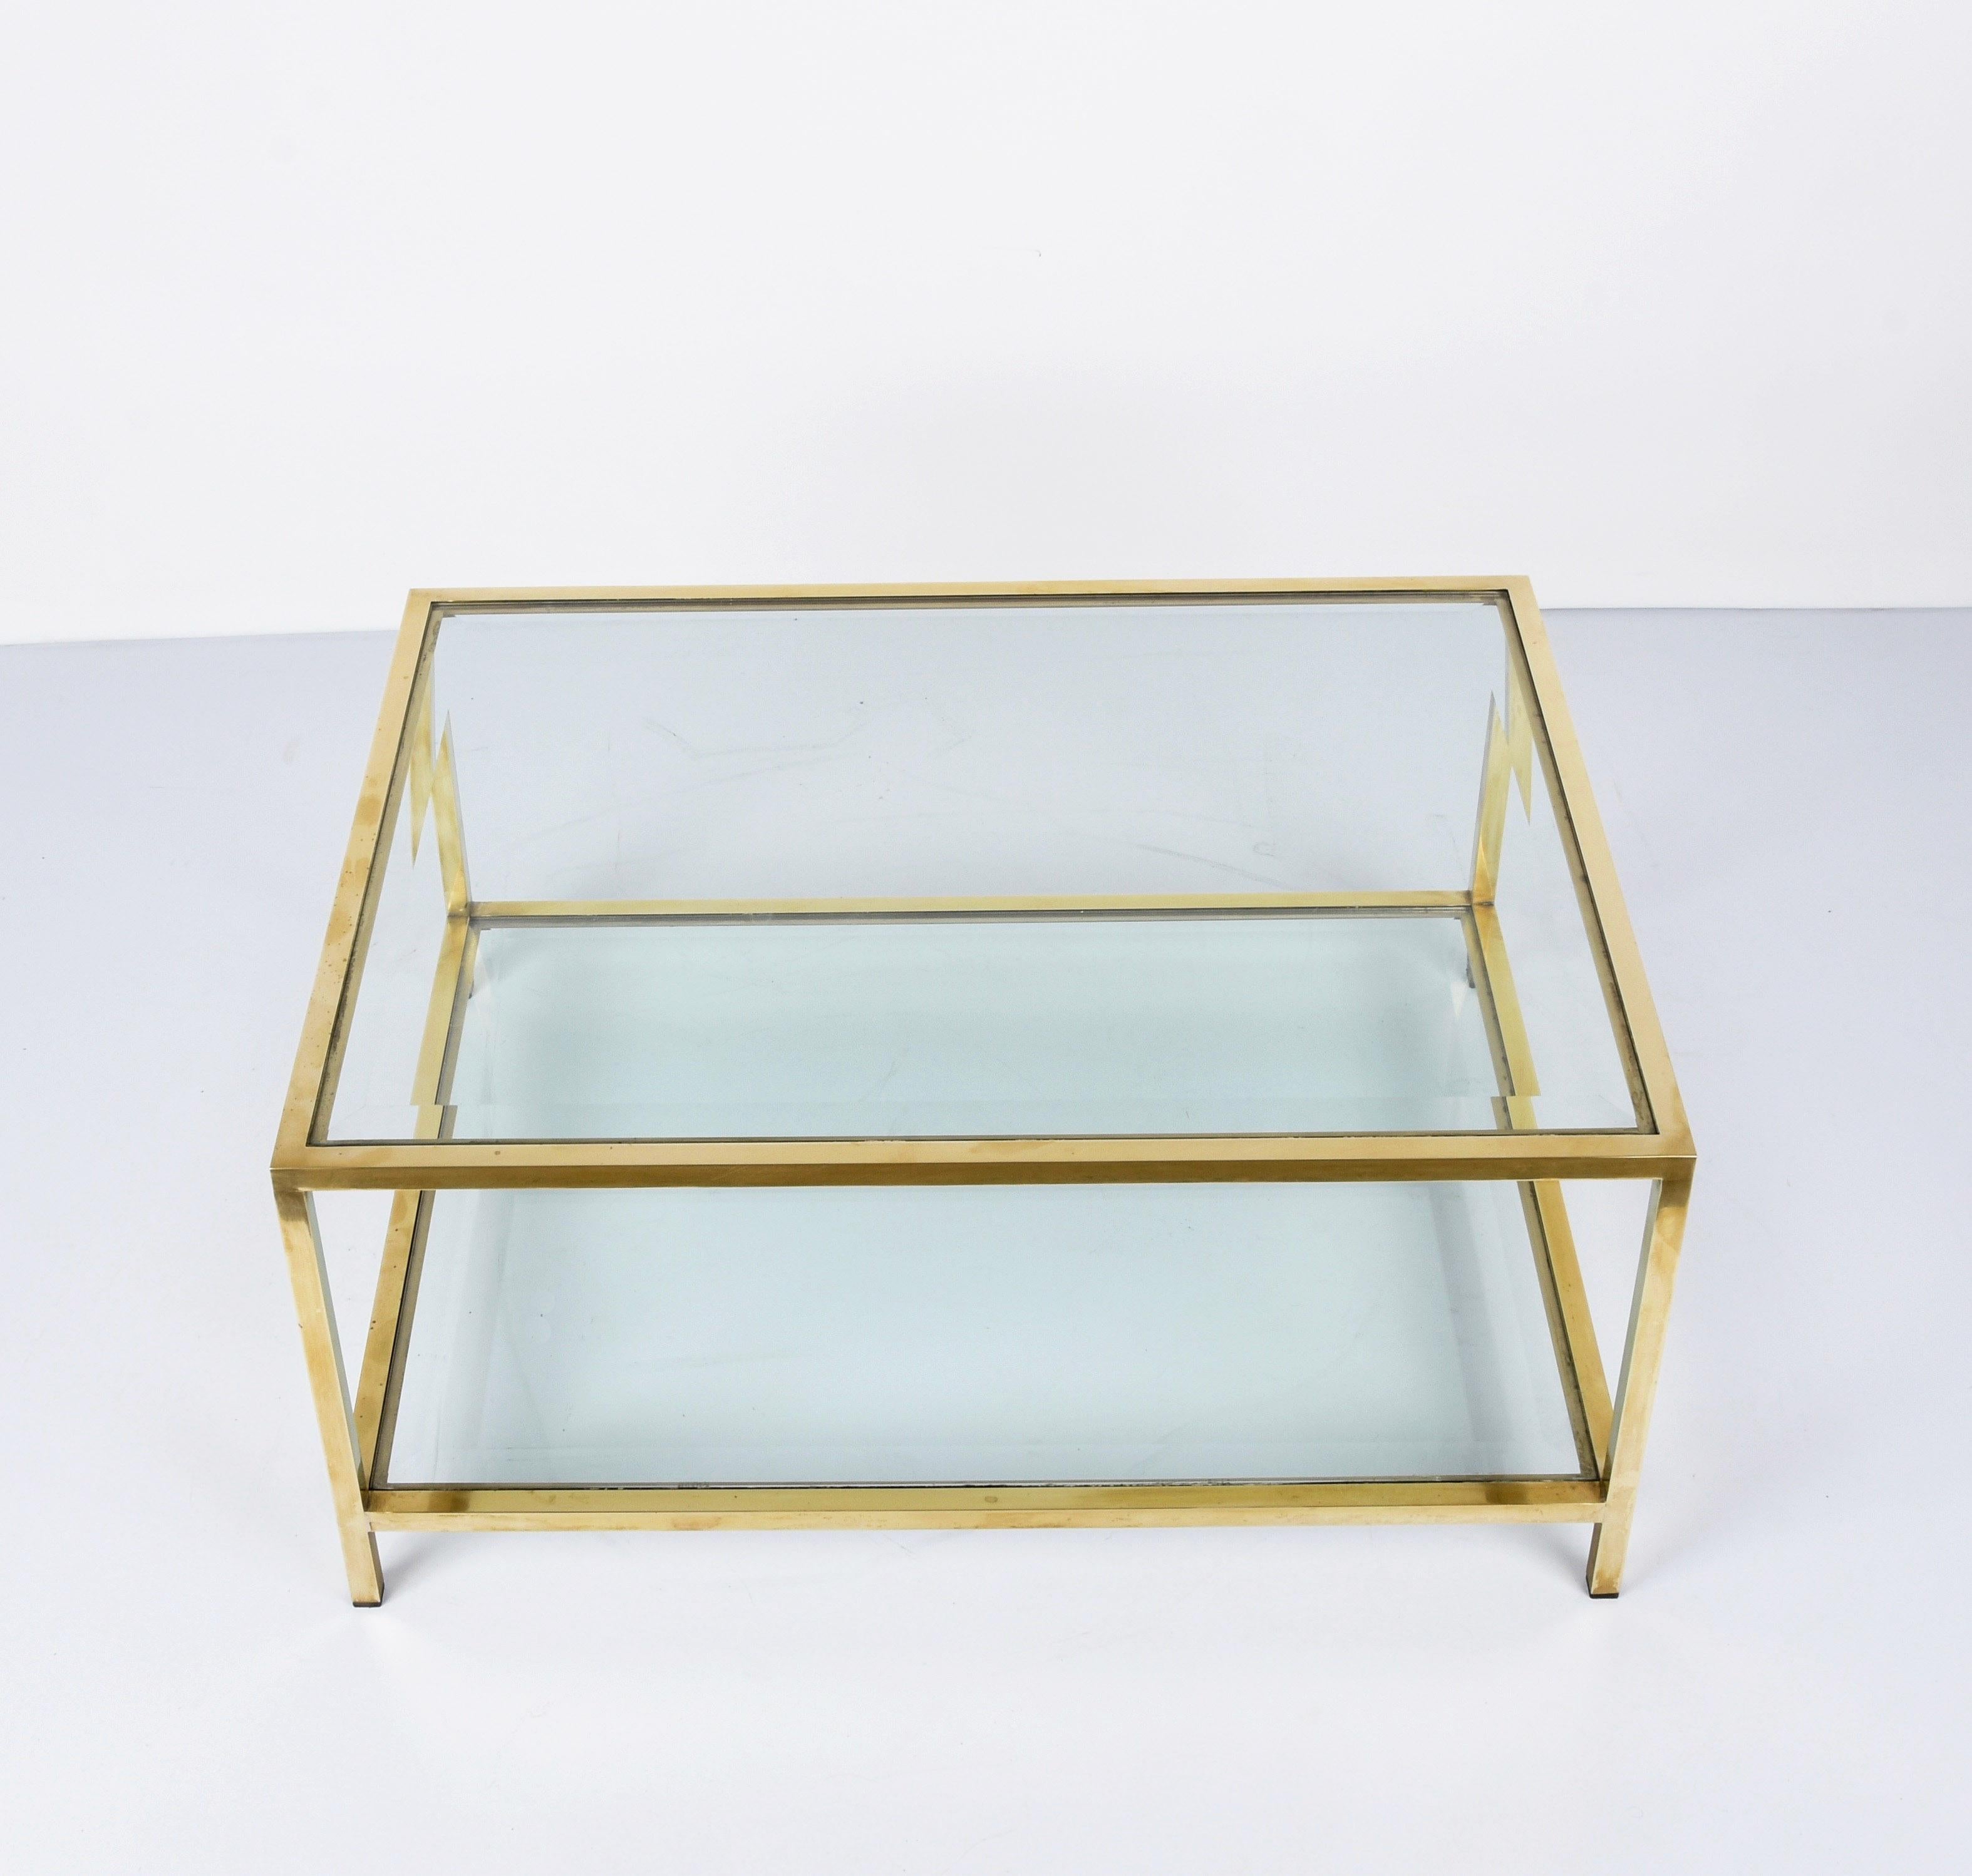 Amazing Mid-Century Modern rectangular coffee table with a brass structure and two-tiered glass tops. This fantastic piece was produced in Italy during the 1970s.

A luxurious item with a rectangular structure composed of straight lines and an